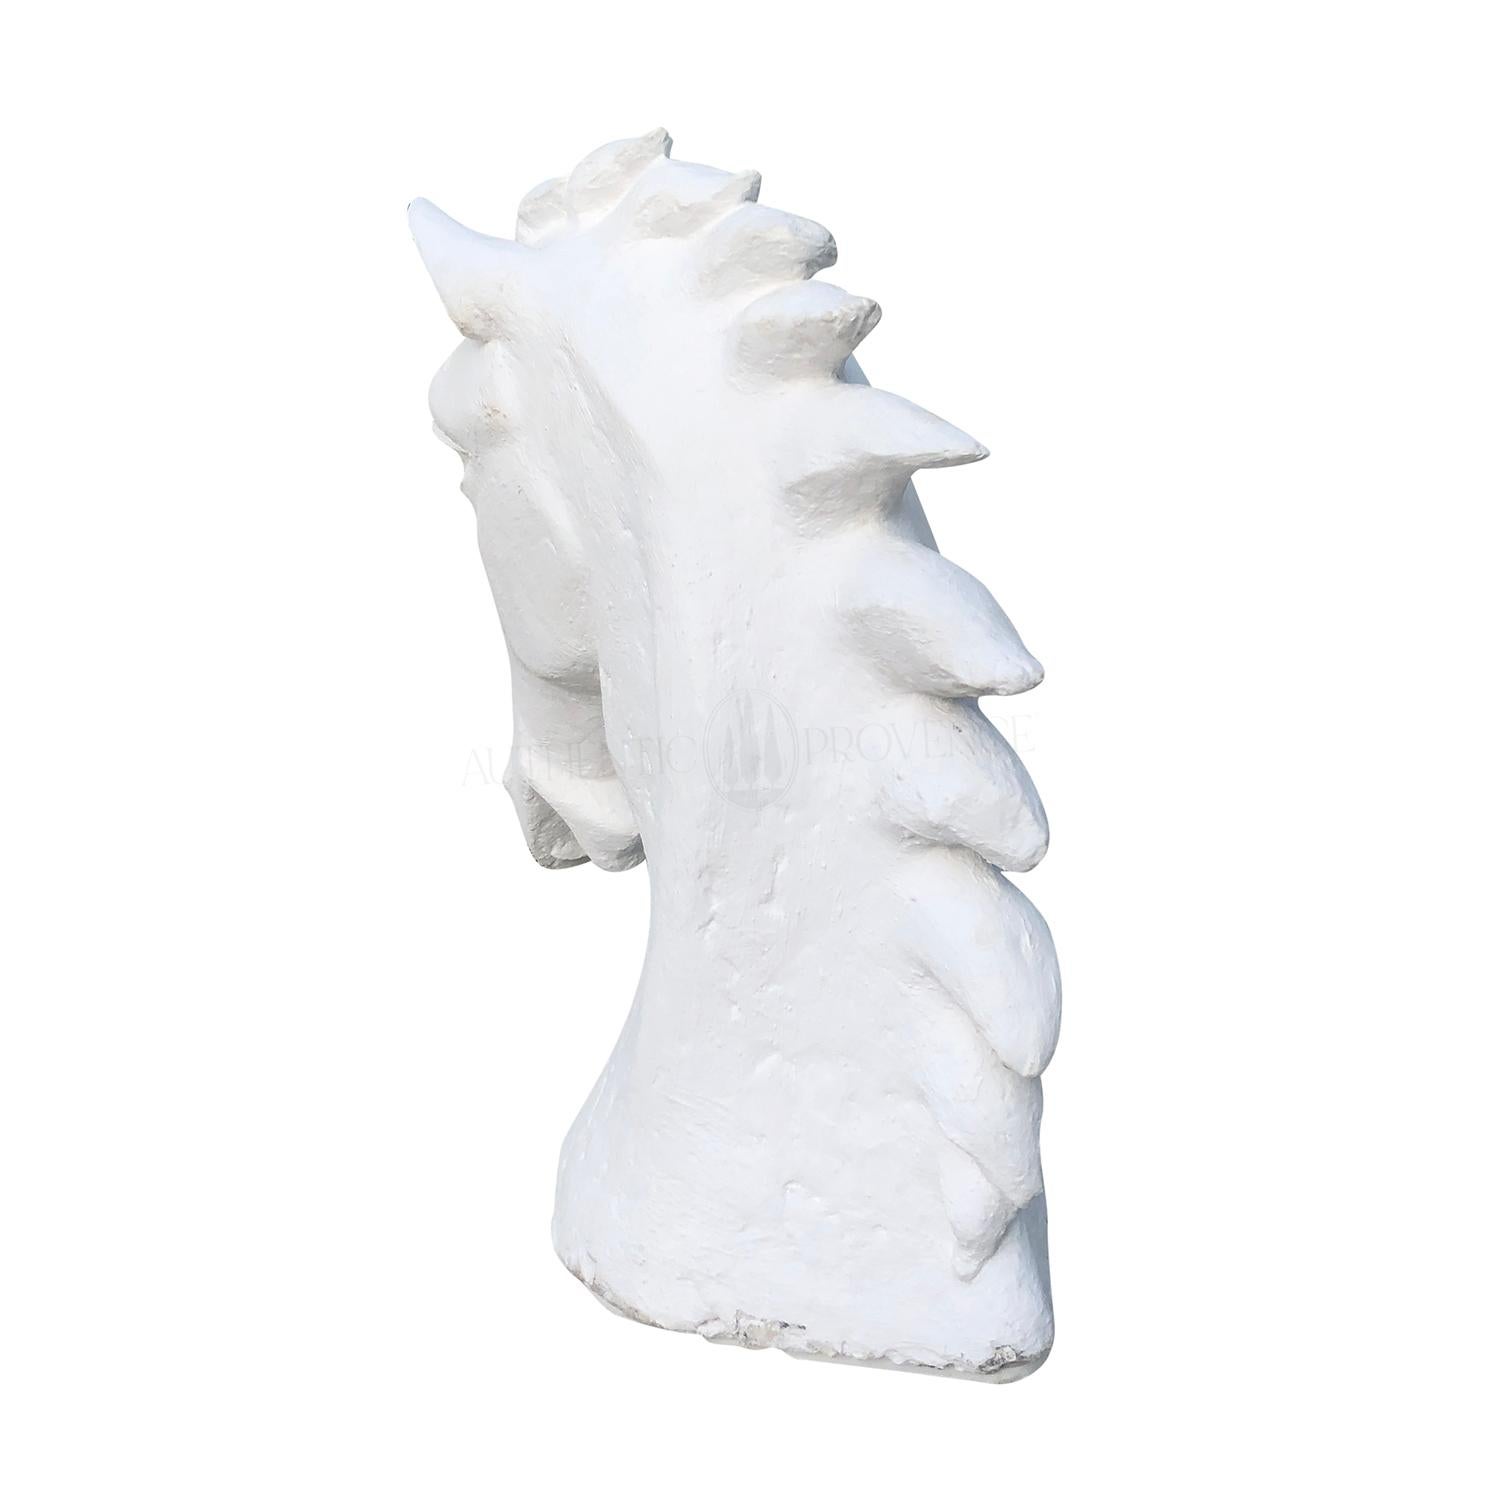 Hand-Crafted 20th Century White French Art Deco Plaster Horse, Vintage Parisian Décor Head For Sale